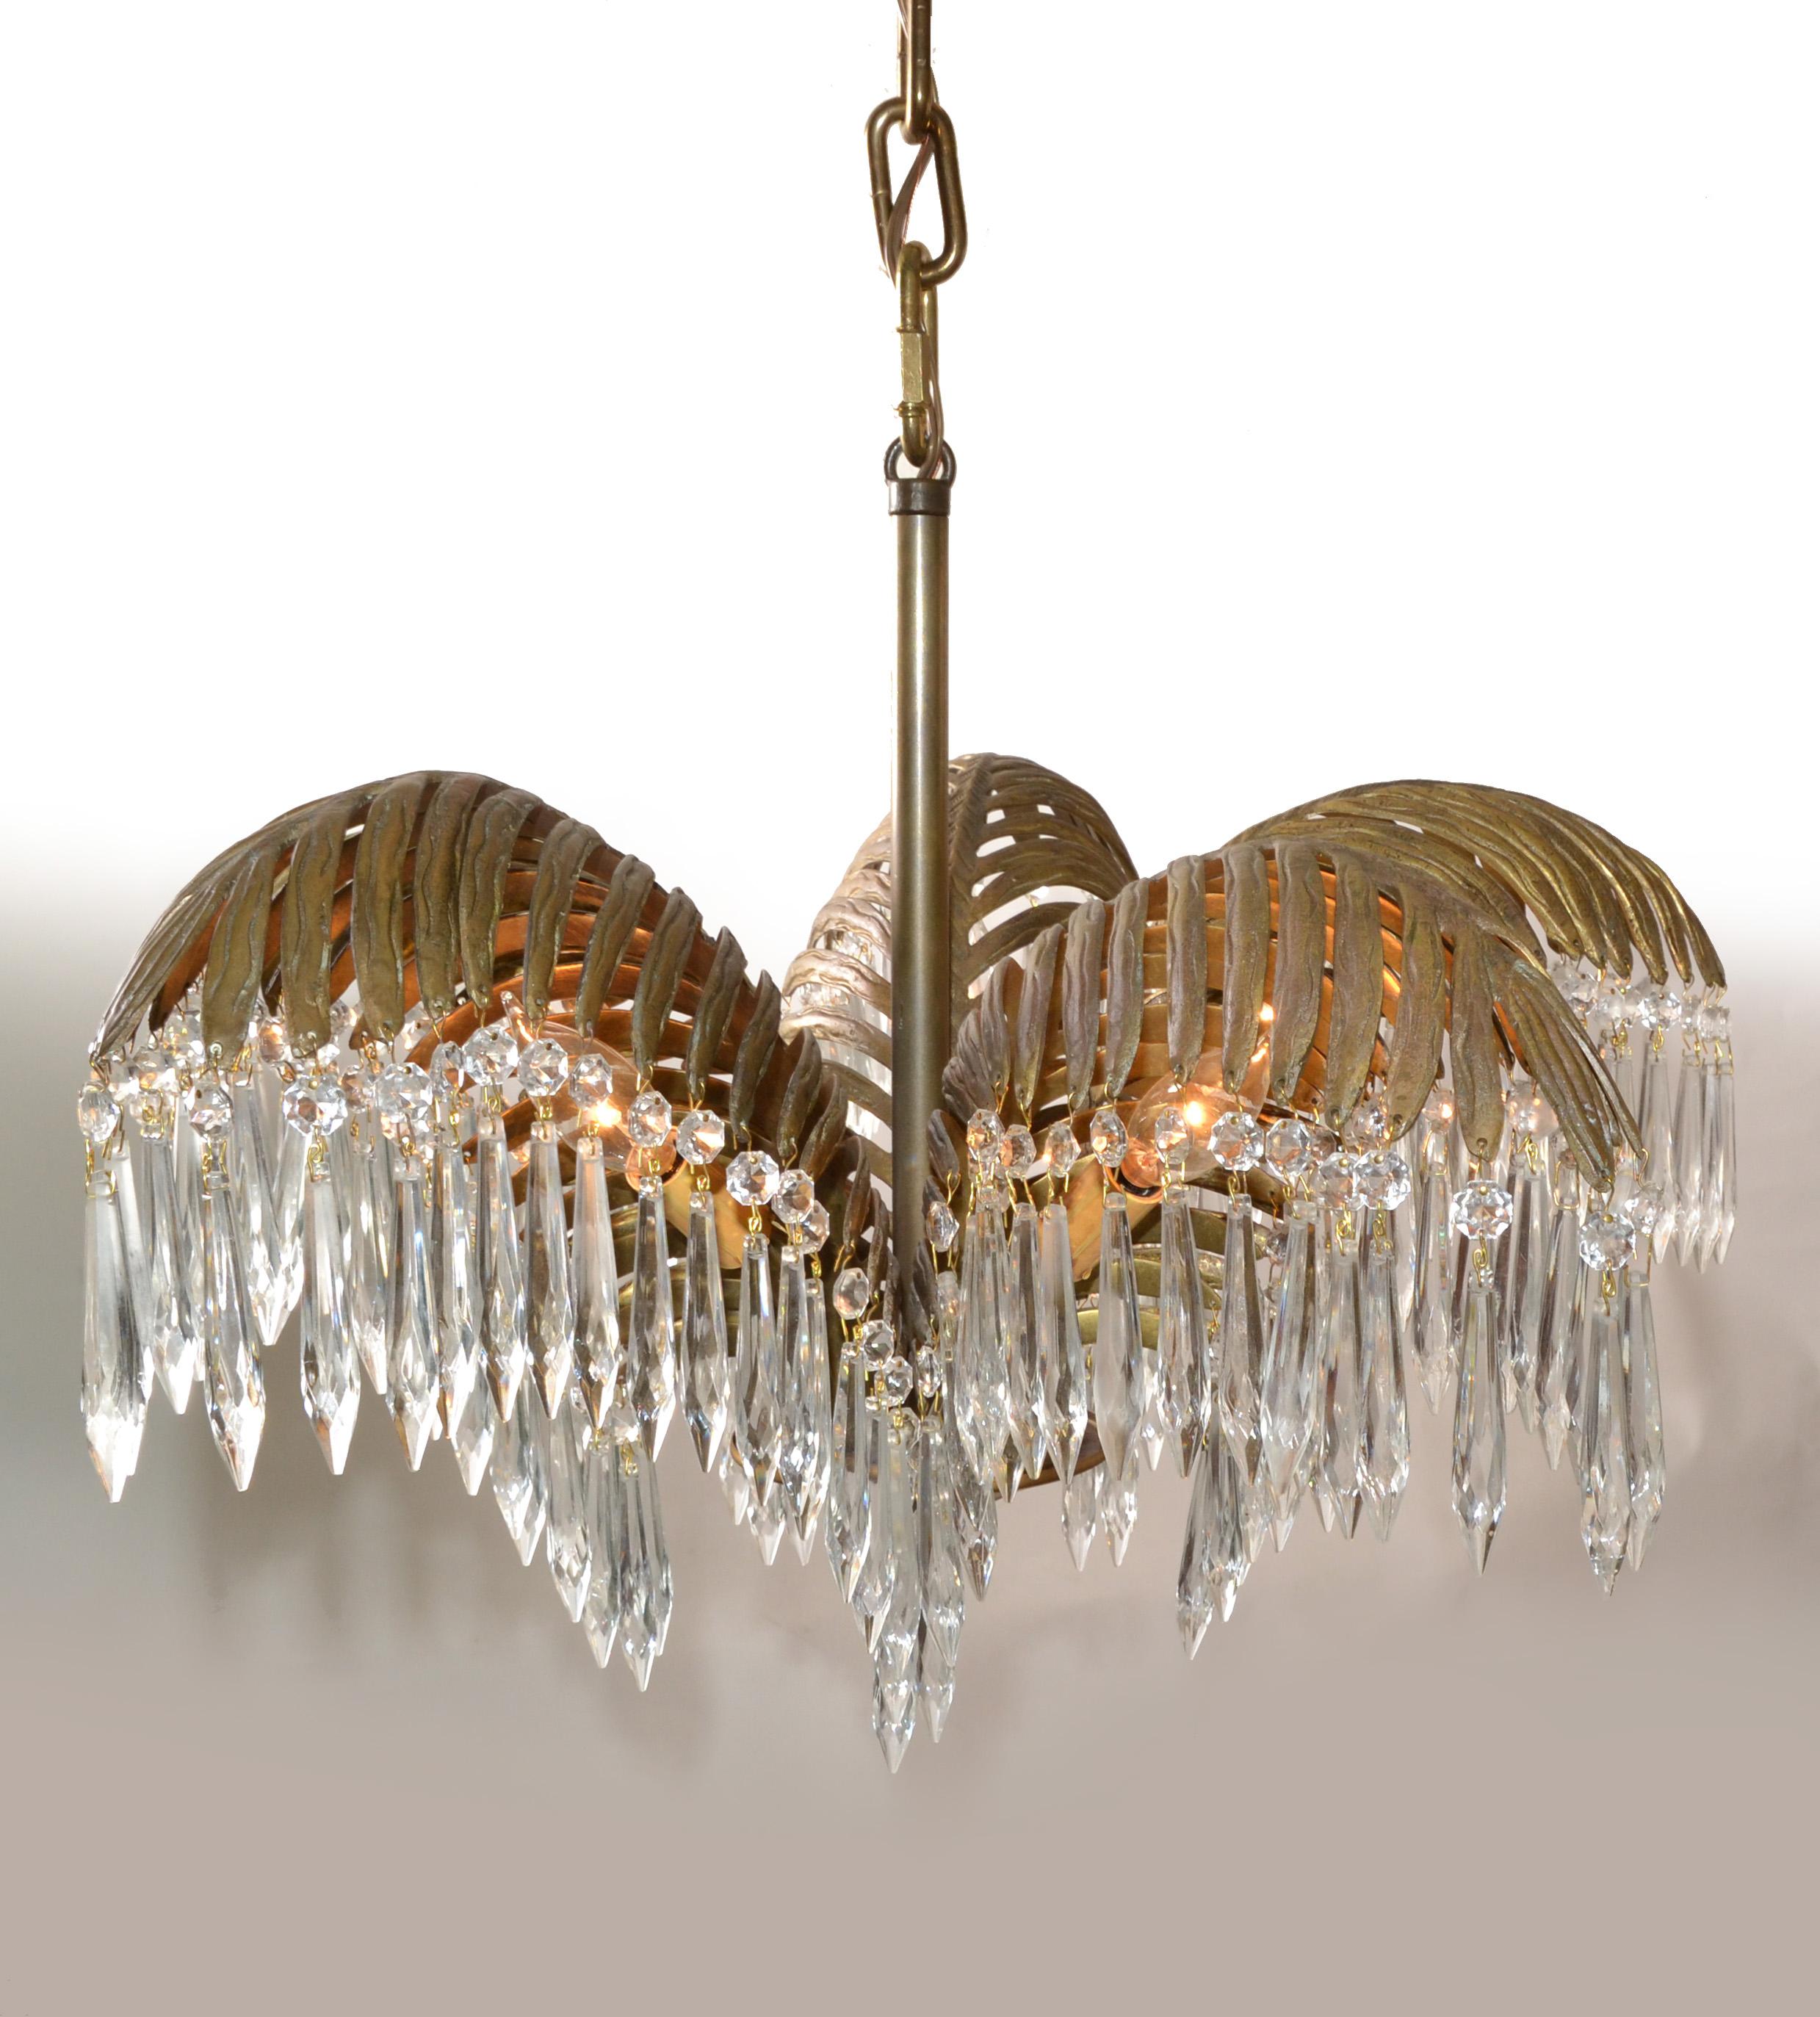 Cast 1920s French Art Deco Solid Bronze & Crystal Leaves Palm Tree 5 Light Chandelier